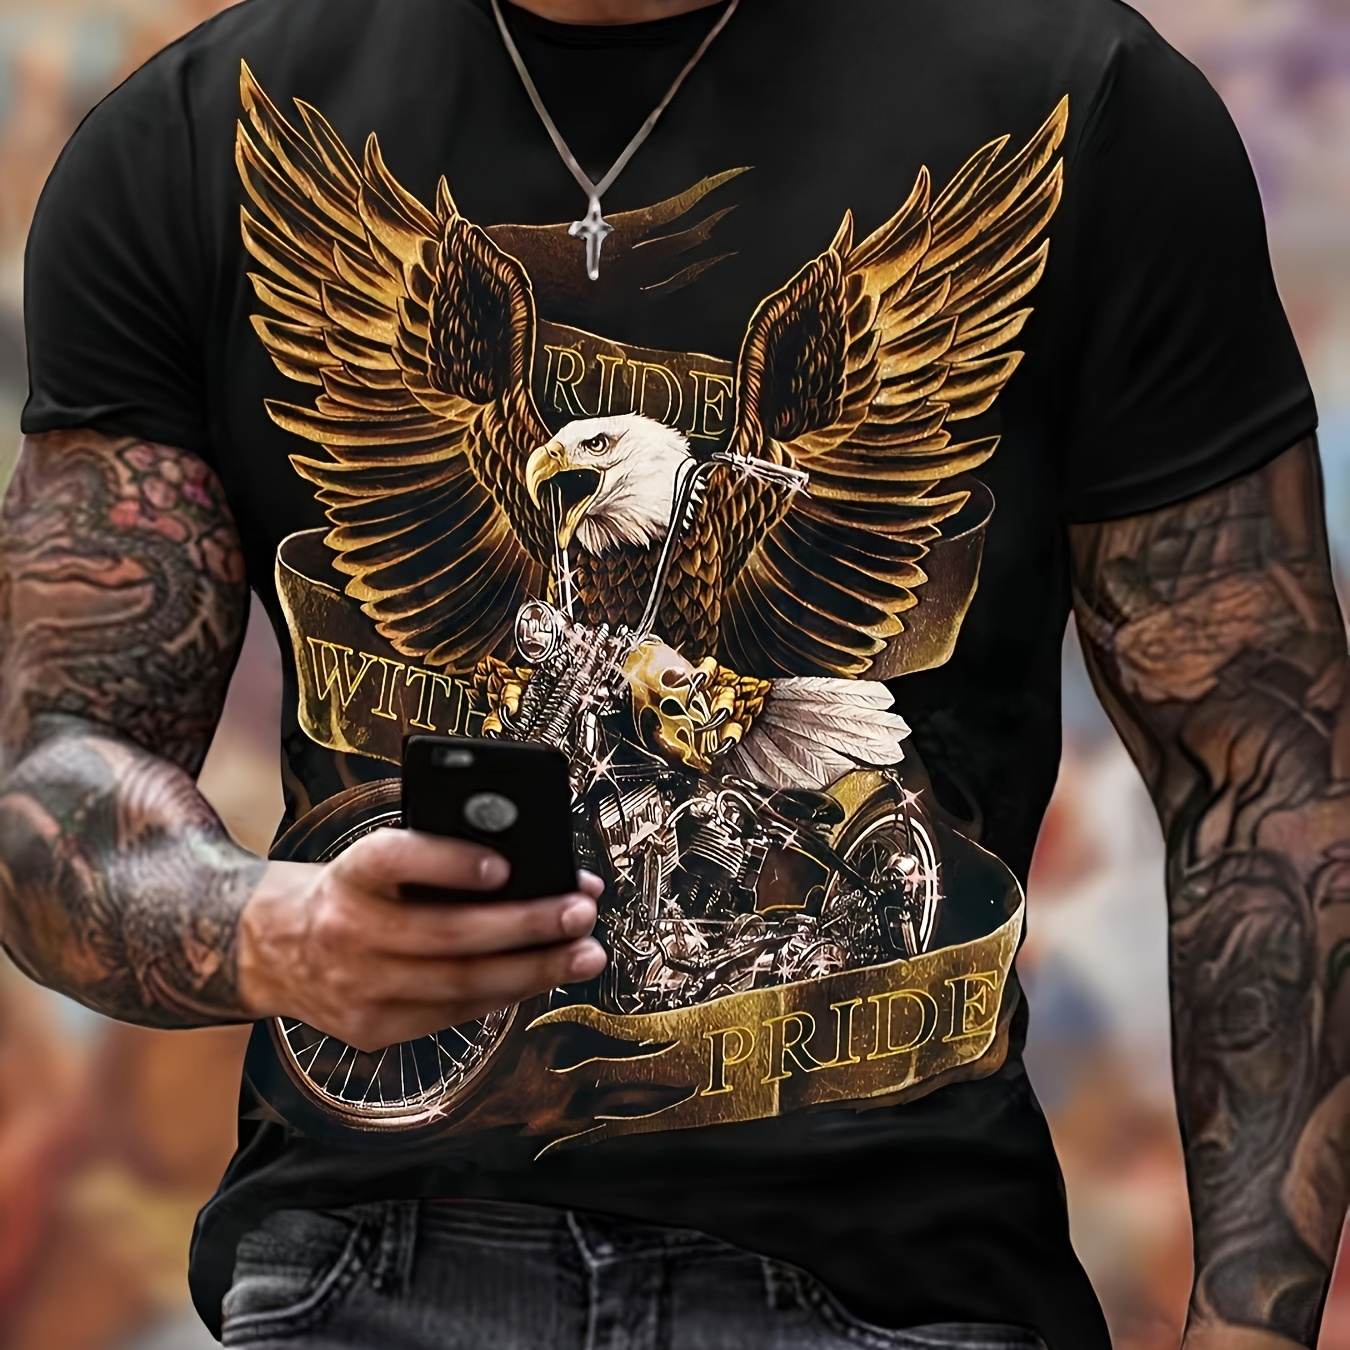 

Men's Eagle Print T-shirt, Casual Short Sleeve Crew Neck Tee, Men's Clothing For Summer Outdoor